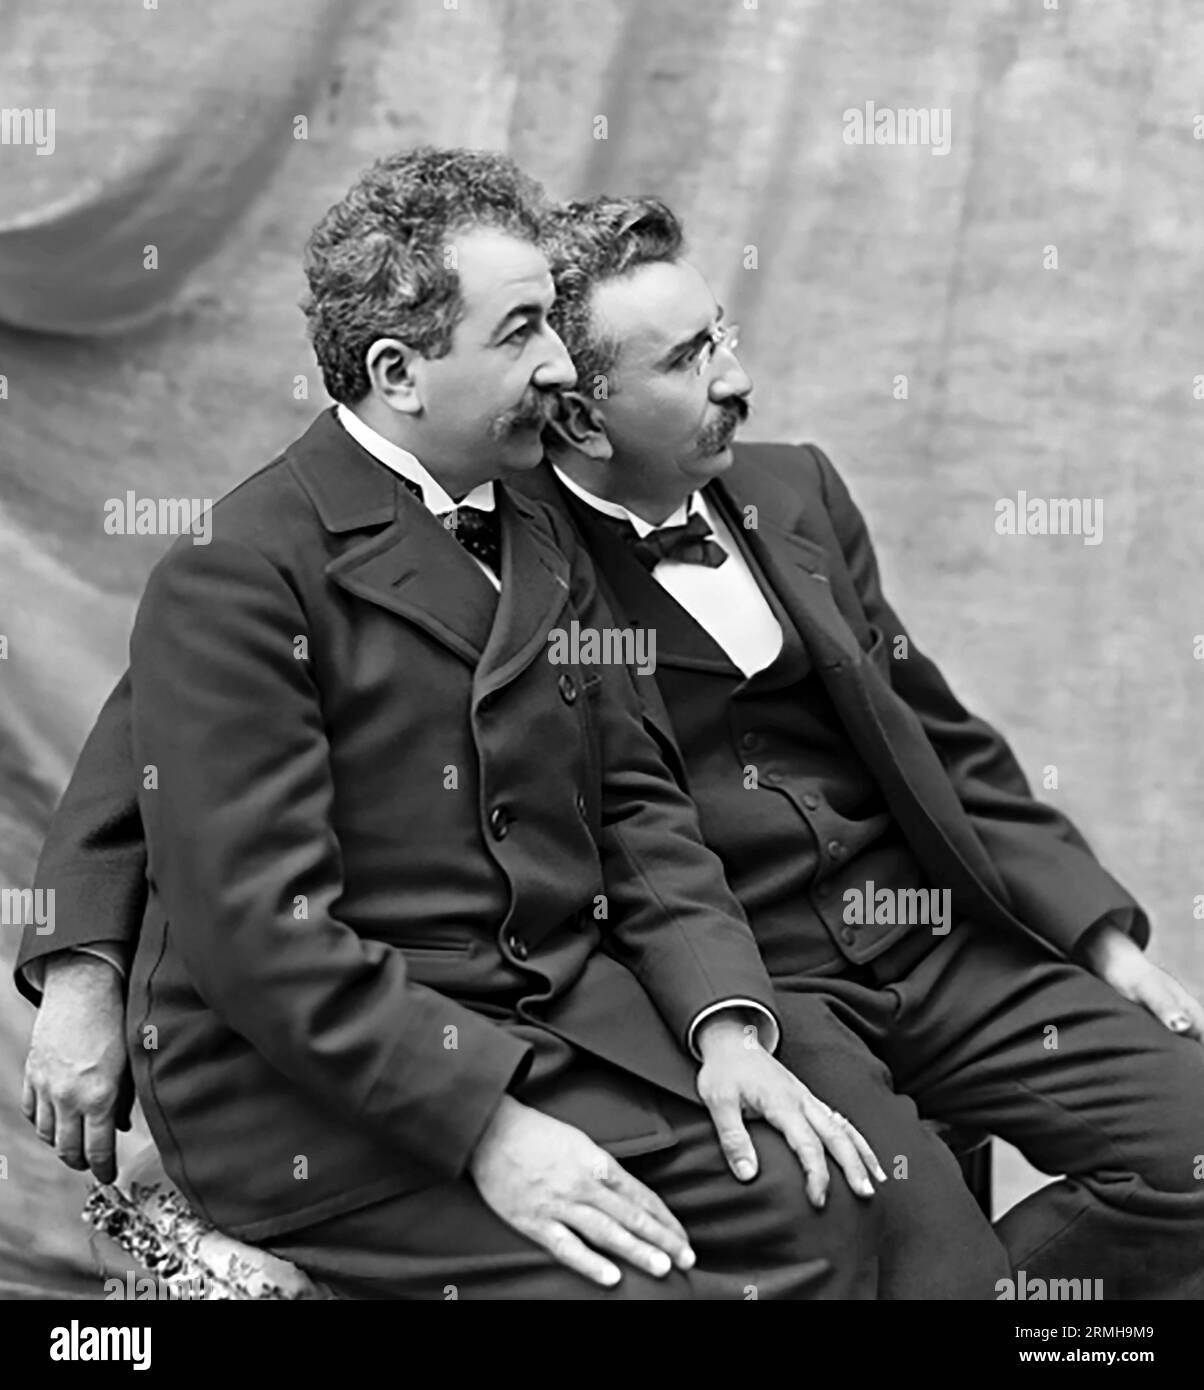 Lumiere brothers, The Lumière brothers (Auguste Marie Louis Nicolas Lumière (1862 – 1954) and Louis Jean Lumière (1864 – 1948), French filmmakers. Stock Photo